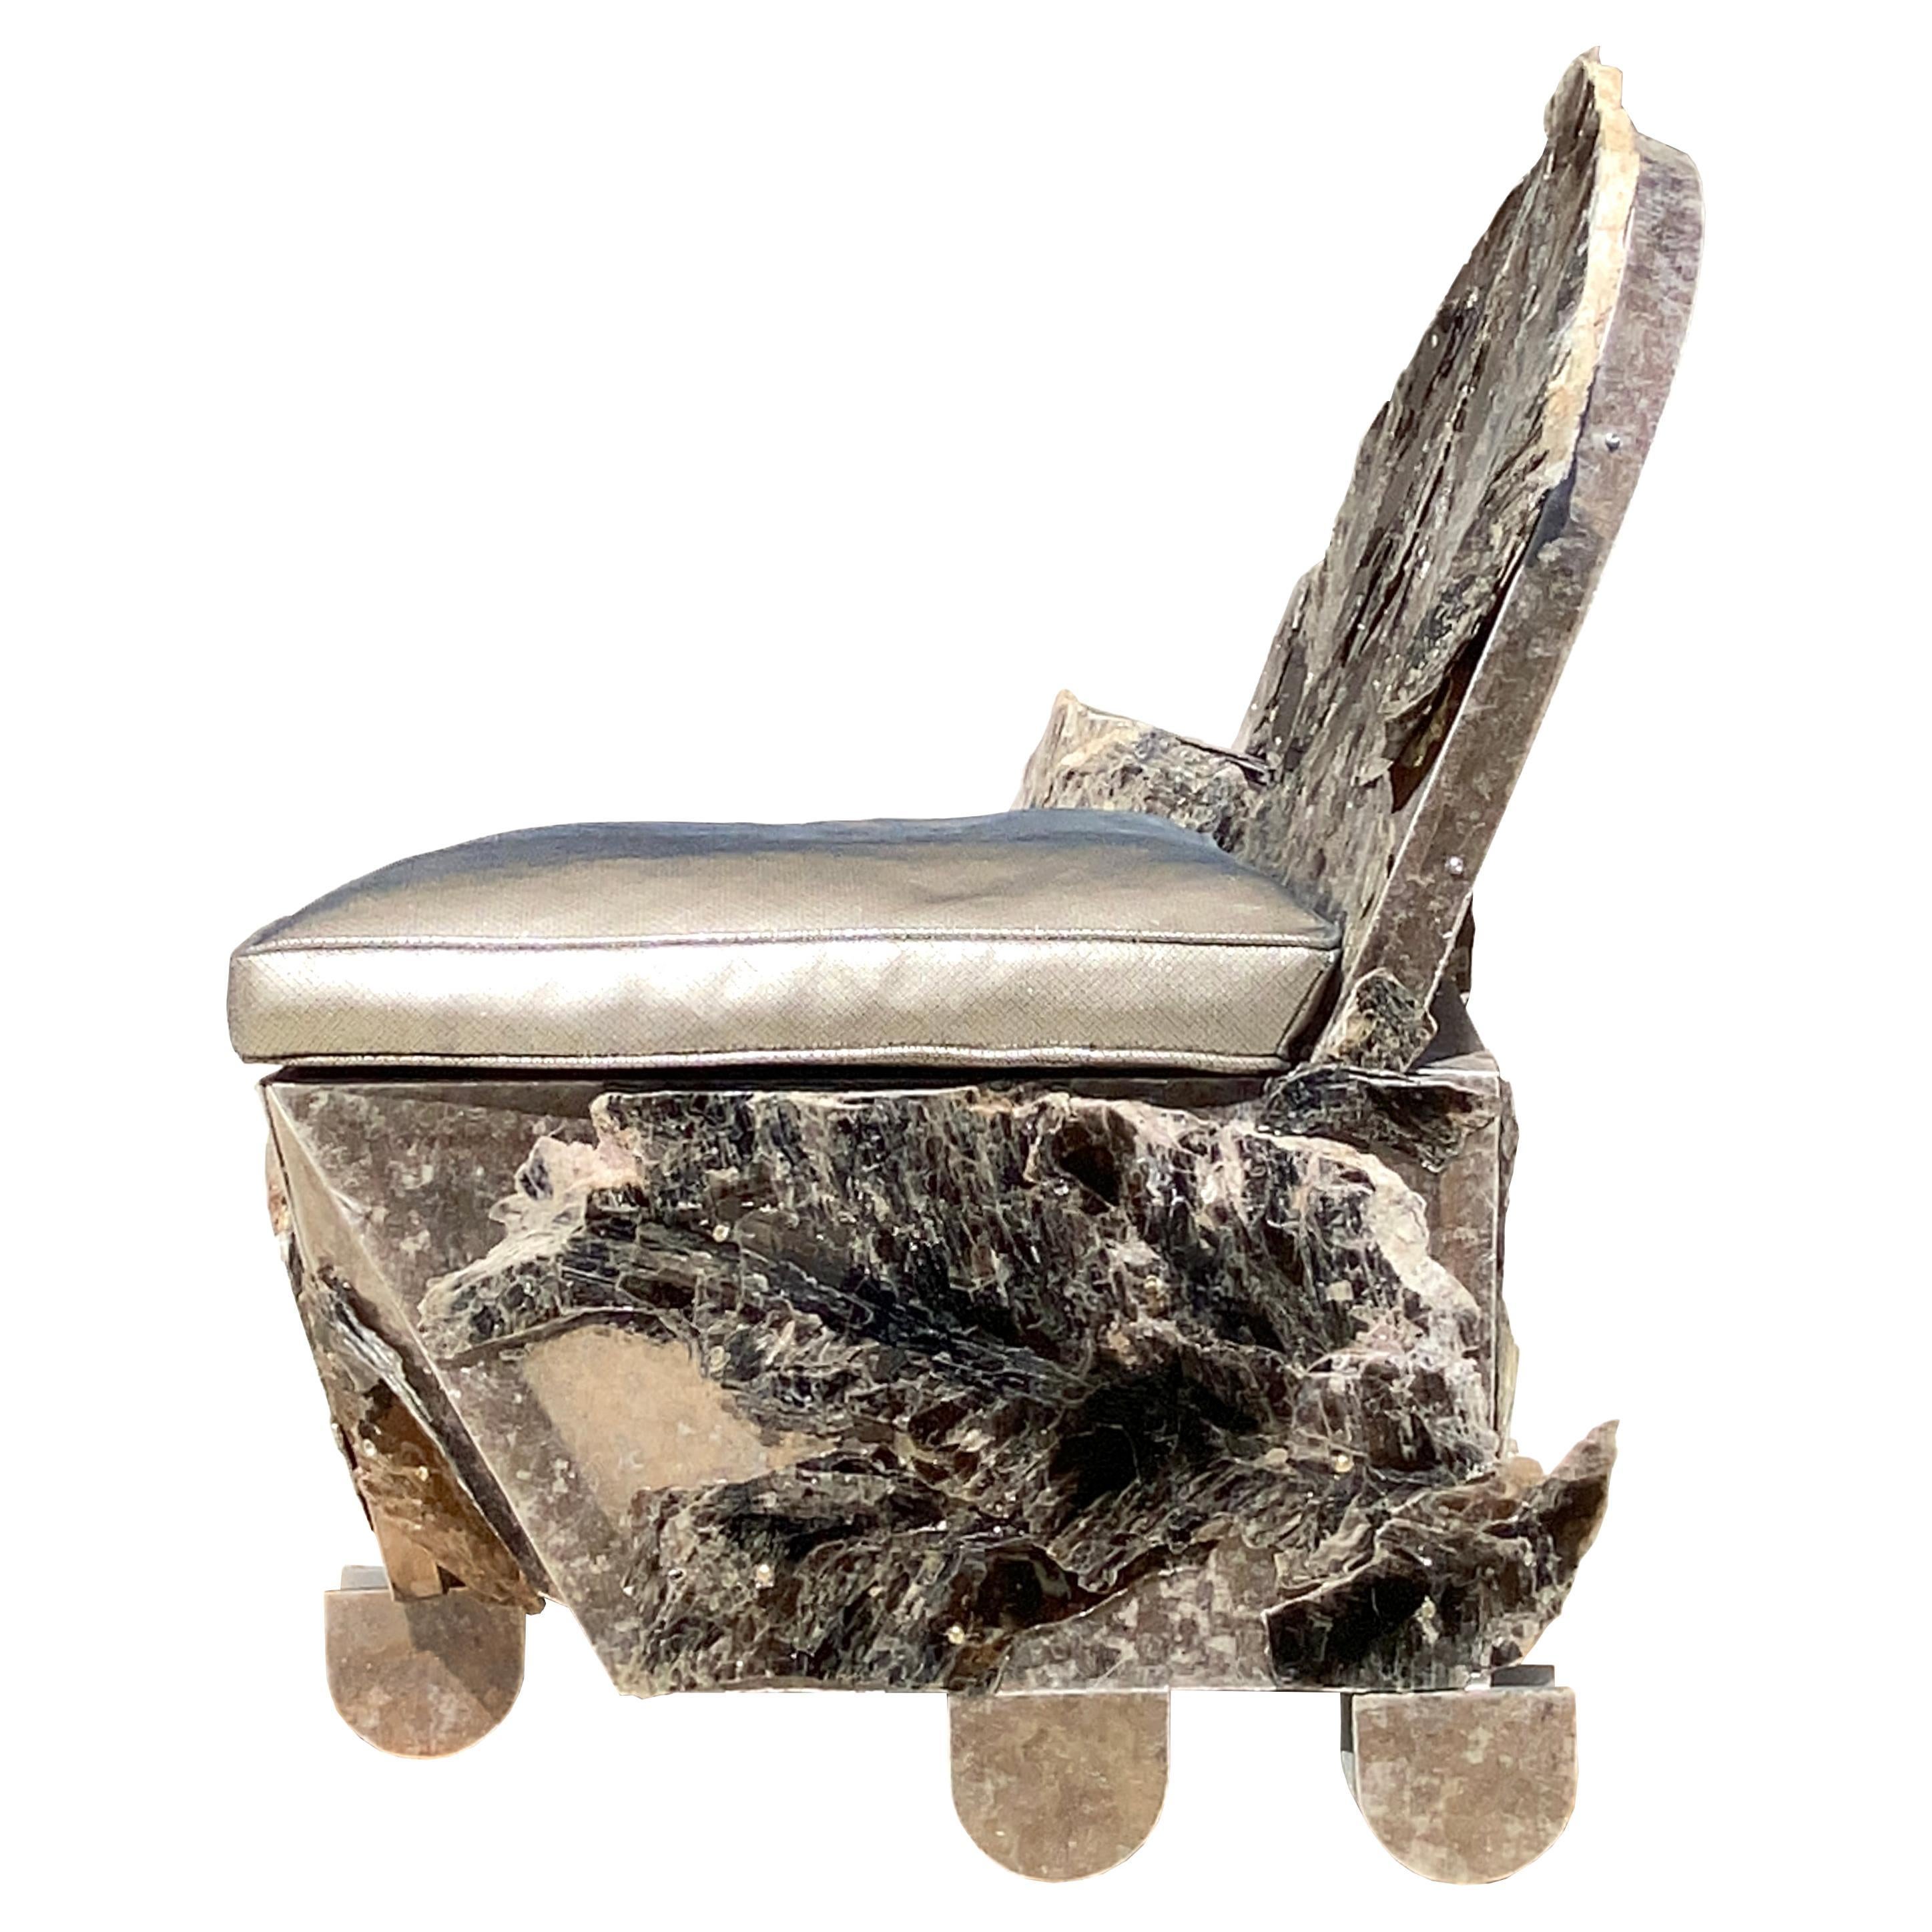 FOUND MINERALS SERIES (“MICA CHAIR”)
SCULPTURE
“Mica’s Chair” is a STEEL frame clad with sheets of opalized MICA and adorned with a metallic leather seat. Signed by the designer in a sense, the construction relies on a kind of design-through